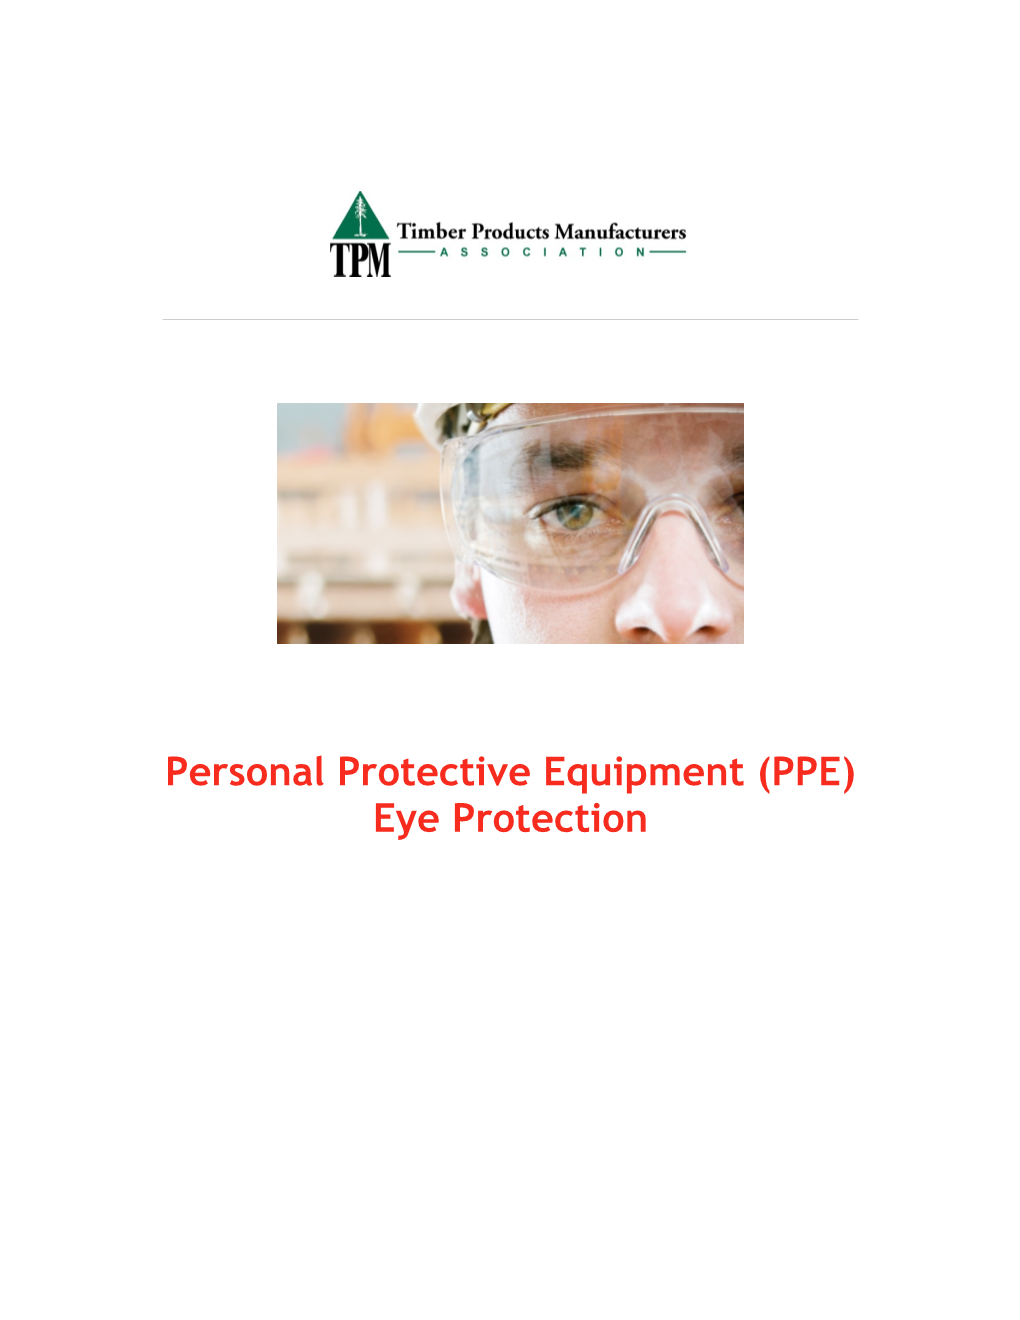 Personal Protective Equipment (PPE) Eye Protection